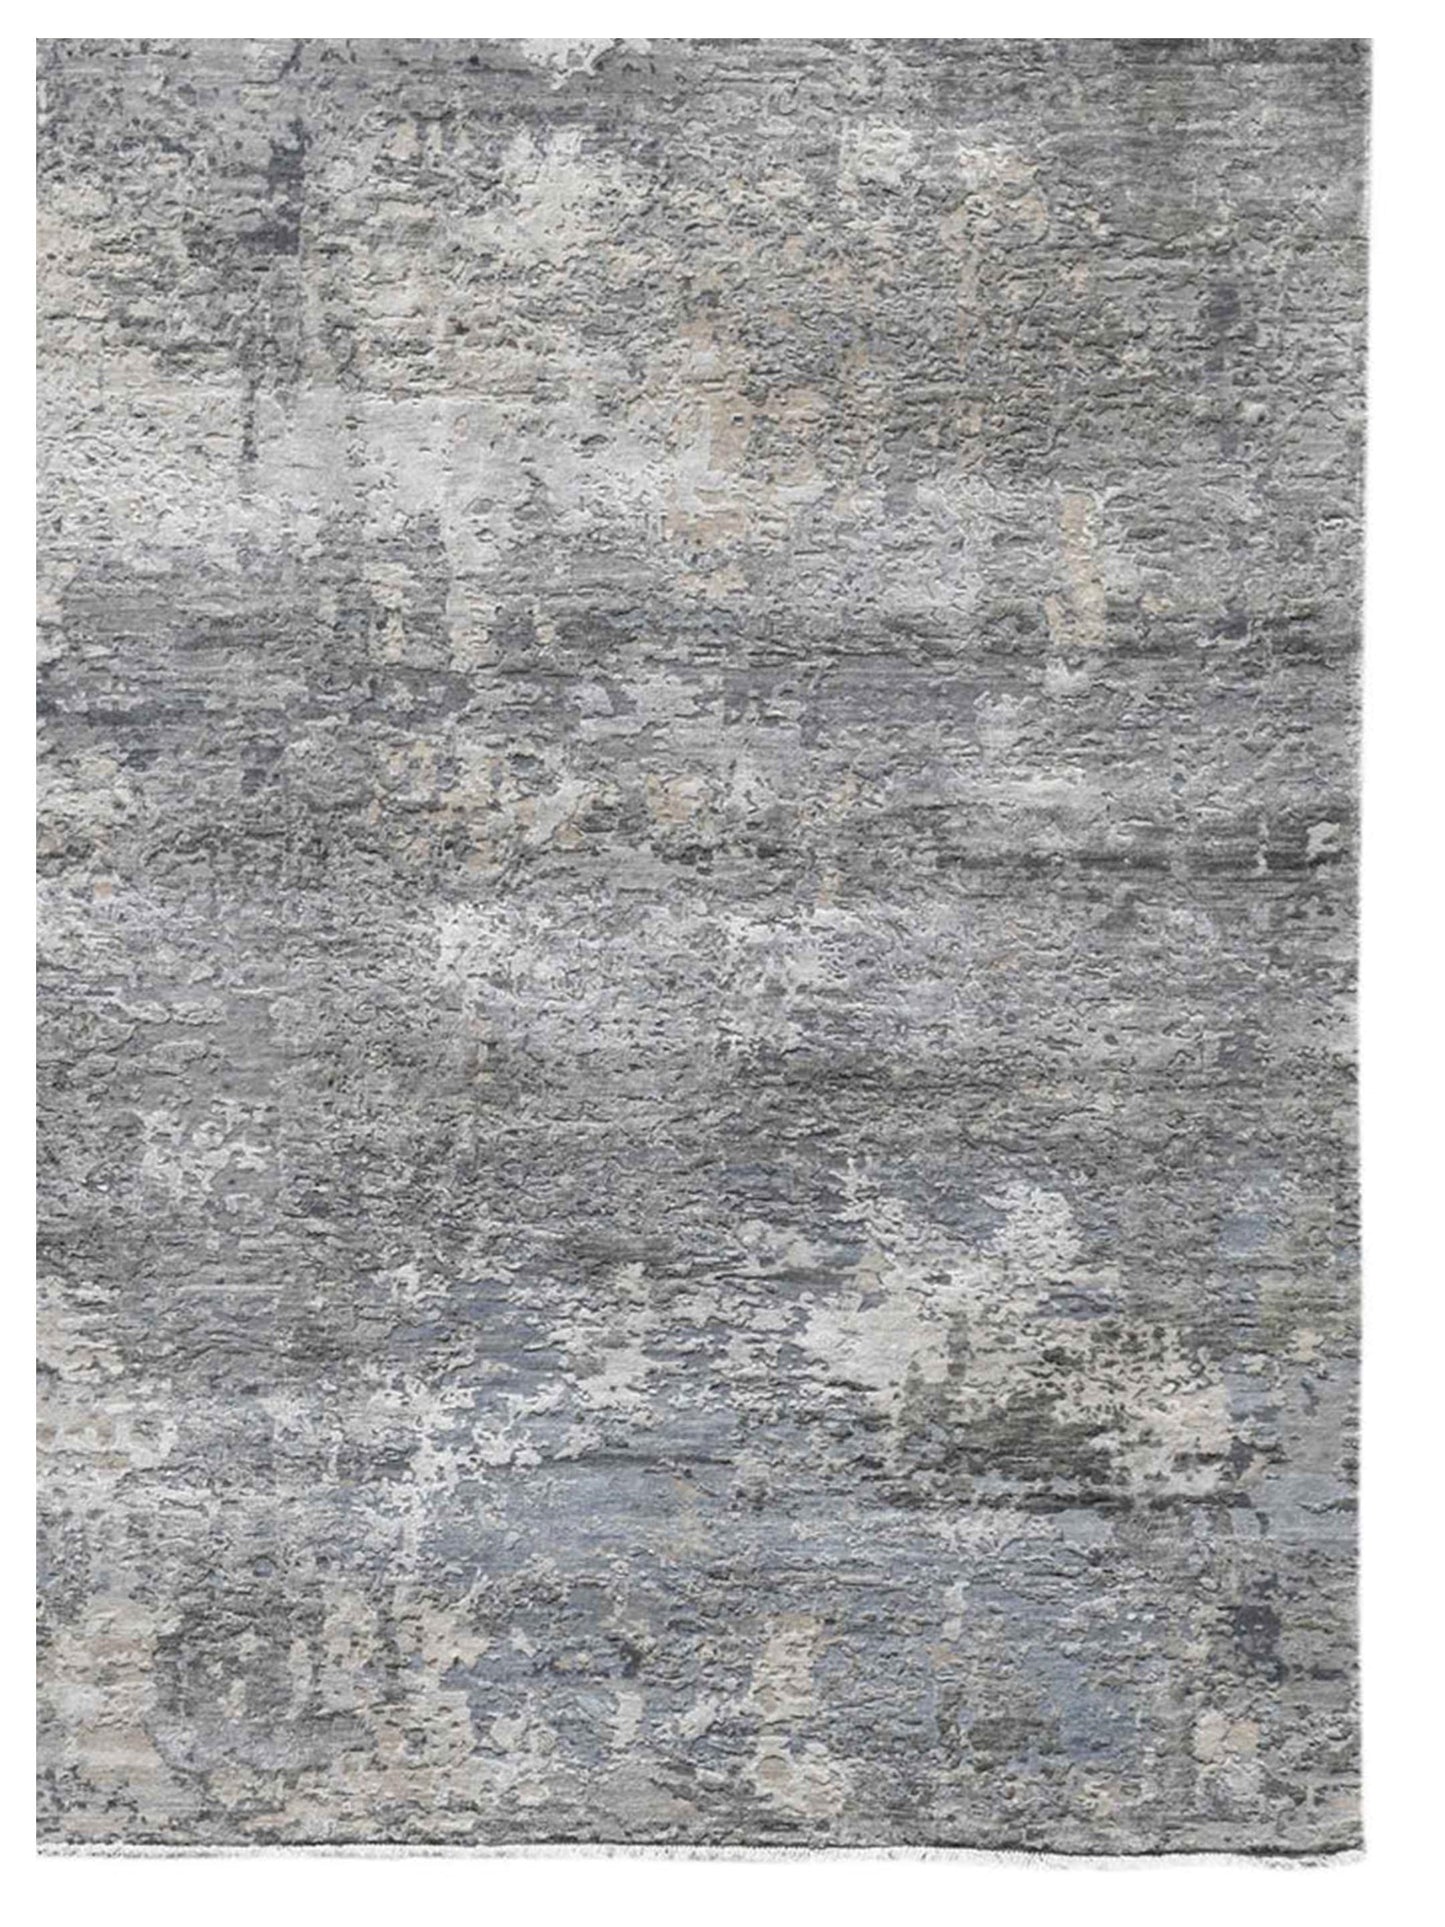 Limited Zelma WI-441 SILVER  Transitional Knotted Rug